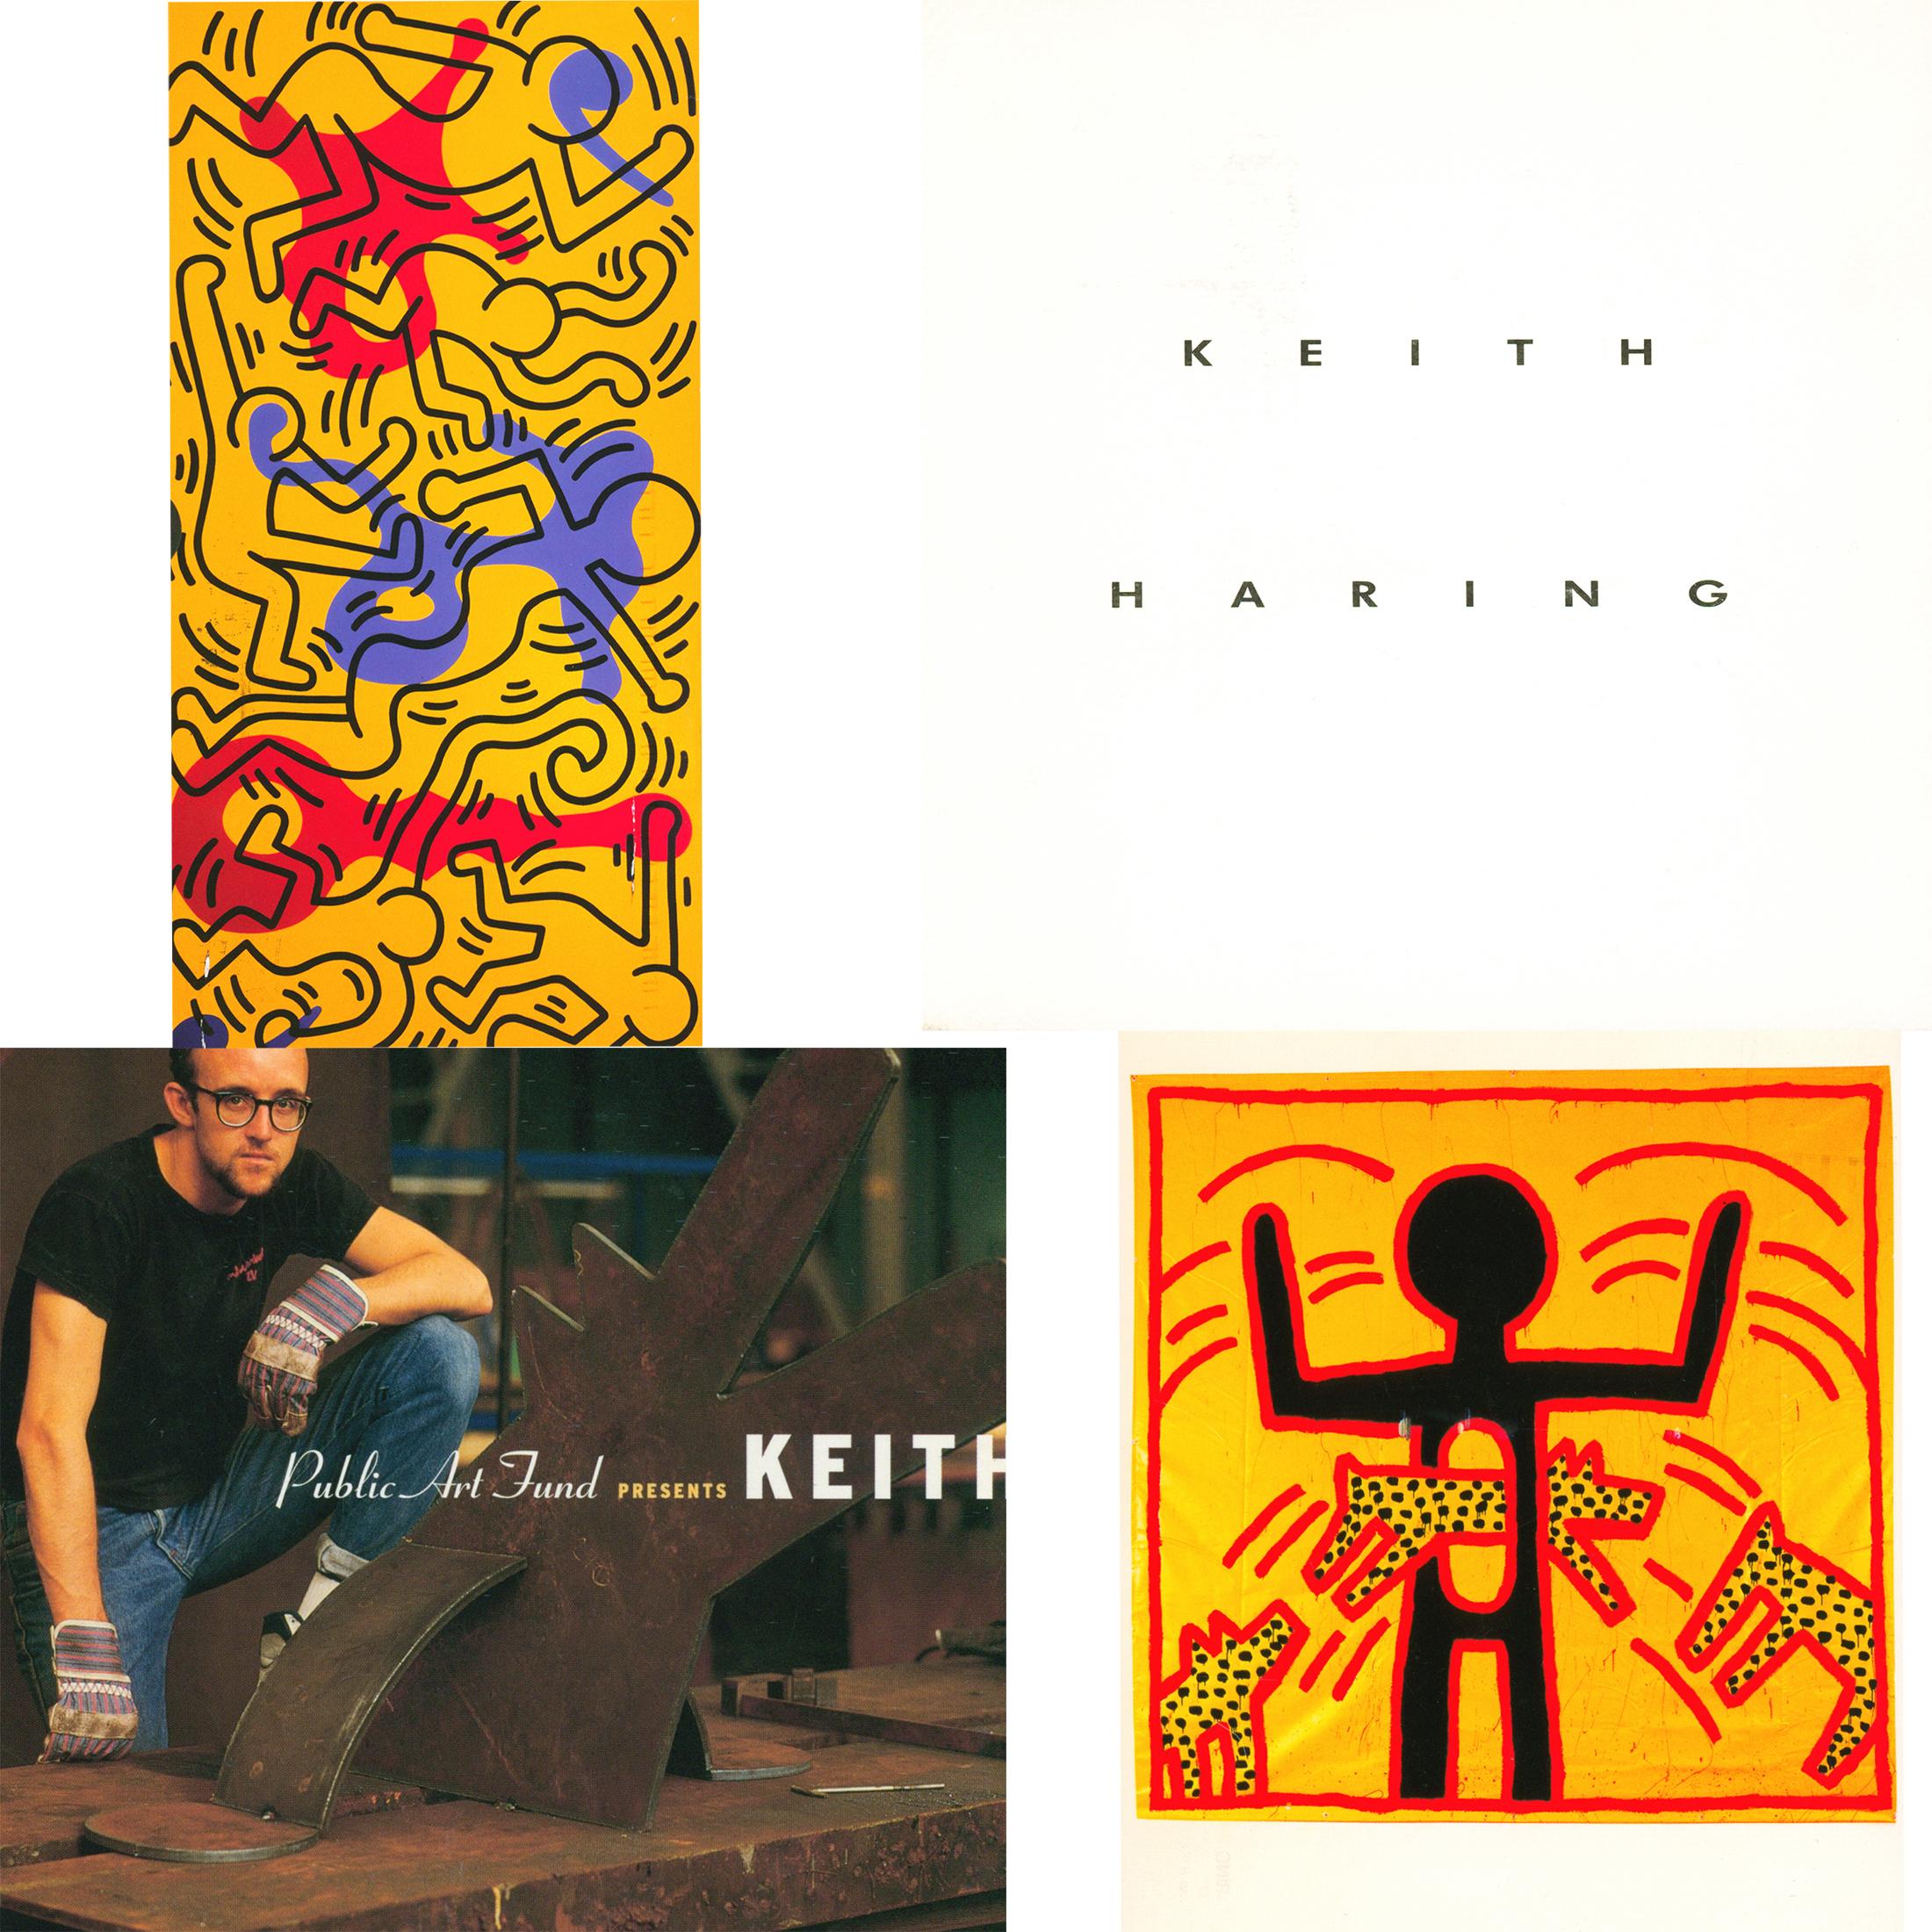 A collection of 30 Keith Haring announcement cards ranging mostly from 1987 to the mid 1990s. Highlights include Keith Haring’s 1990 memorial exhibition at Tony Shafrazi gallery; 1980s/1990s Keith Haring Pop Shop promo cards; mailers for Stonewall